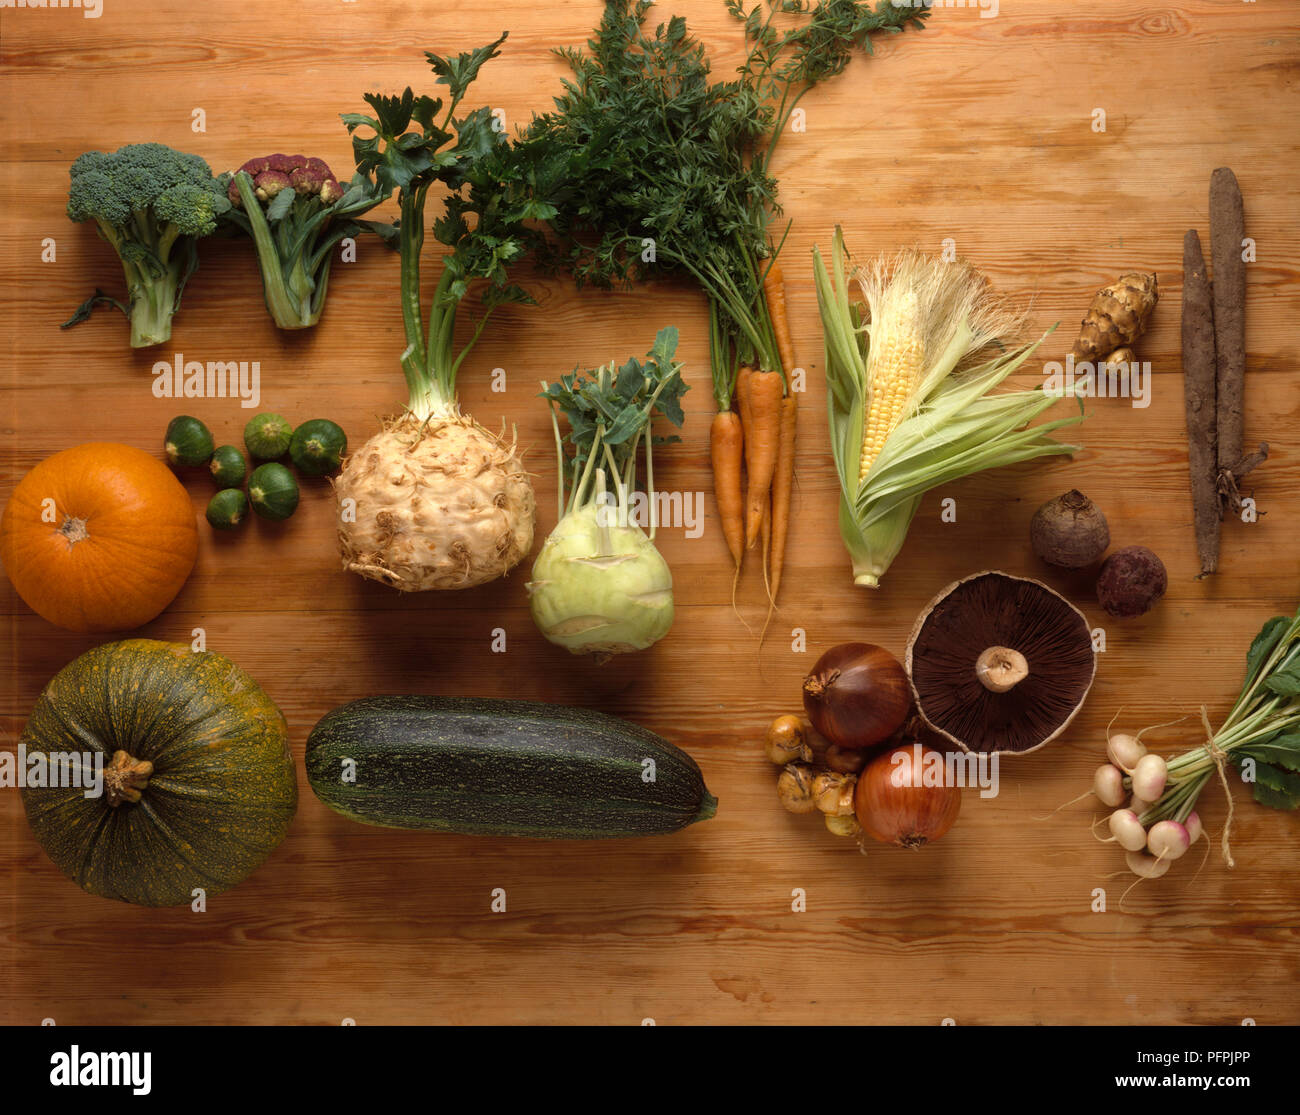 Selection of vegetables on wooden background Stock Photo